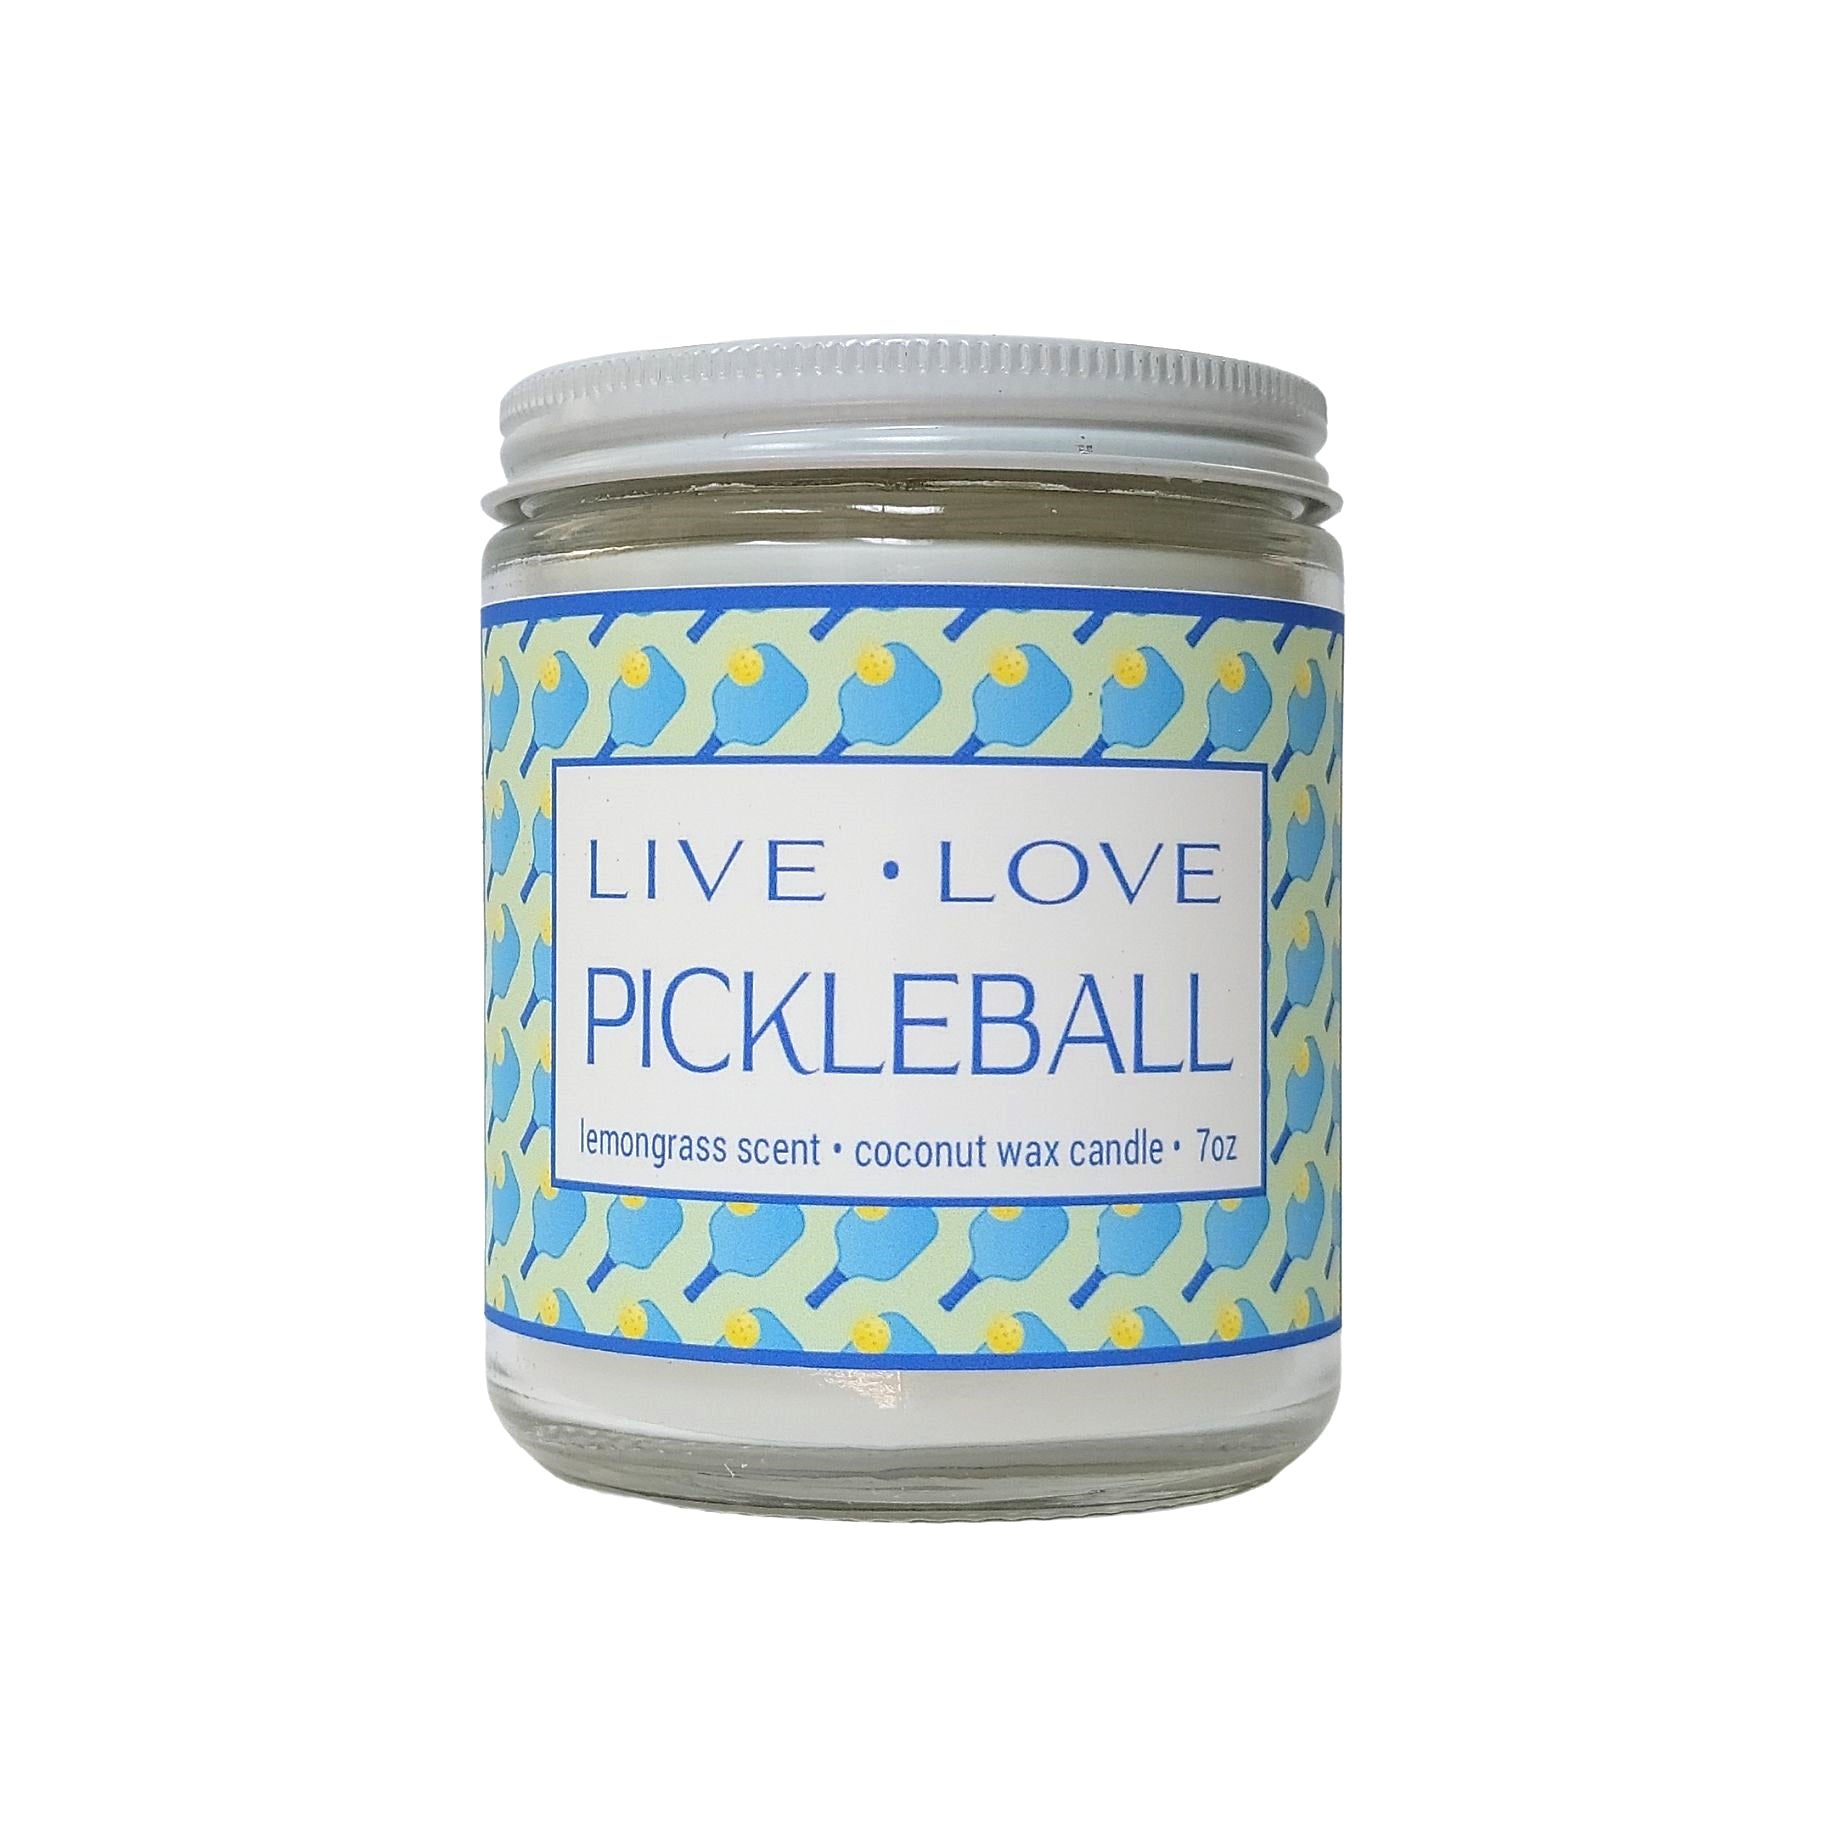 LIVE LOVE PICKLEBALL 7oz Candle made with coconut was and scented with Lemongrass